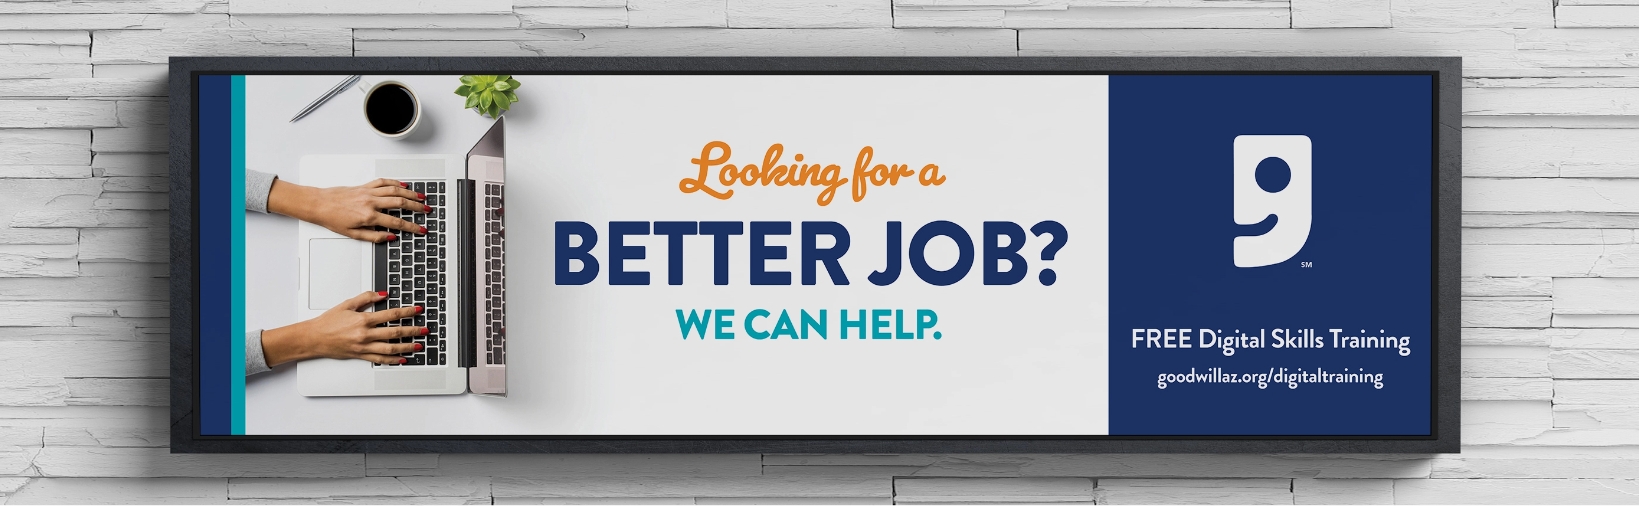 Goodwill Ad | Looking for a better job?